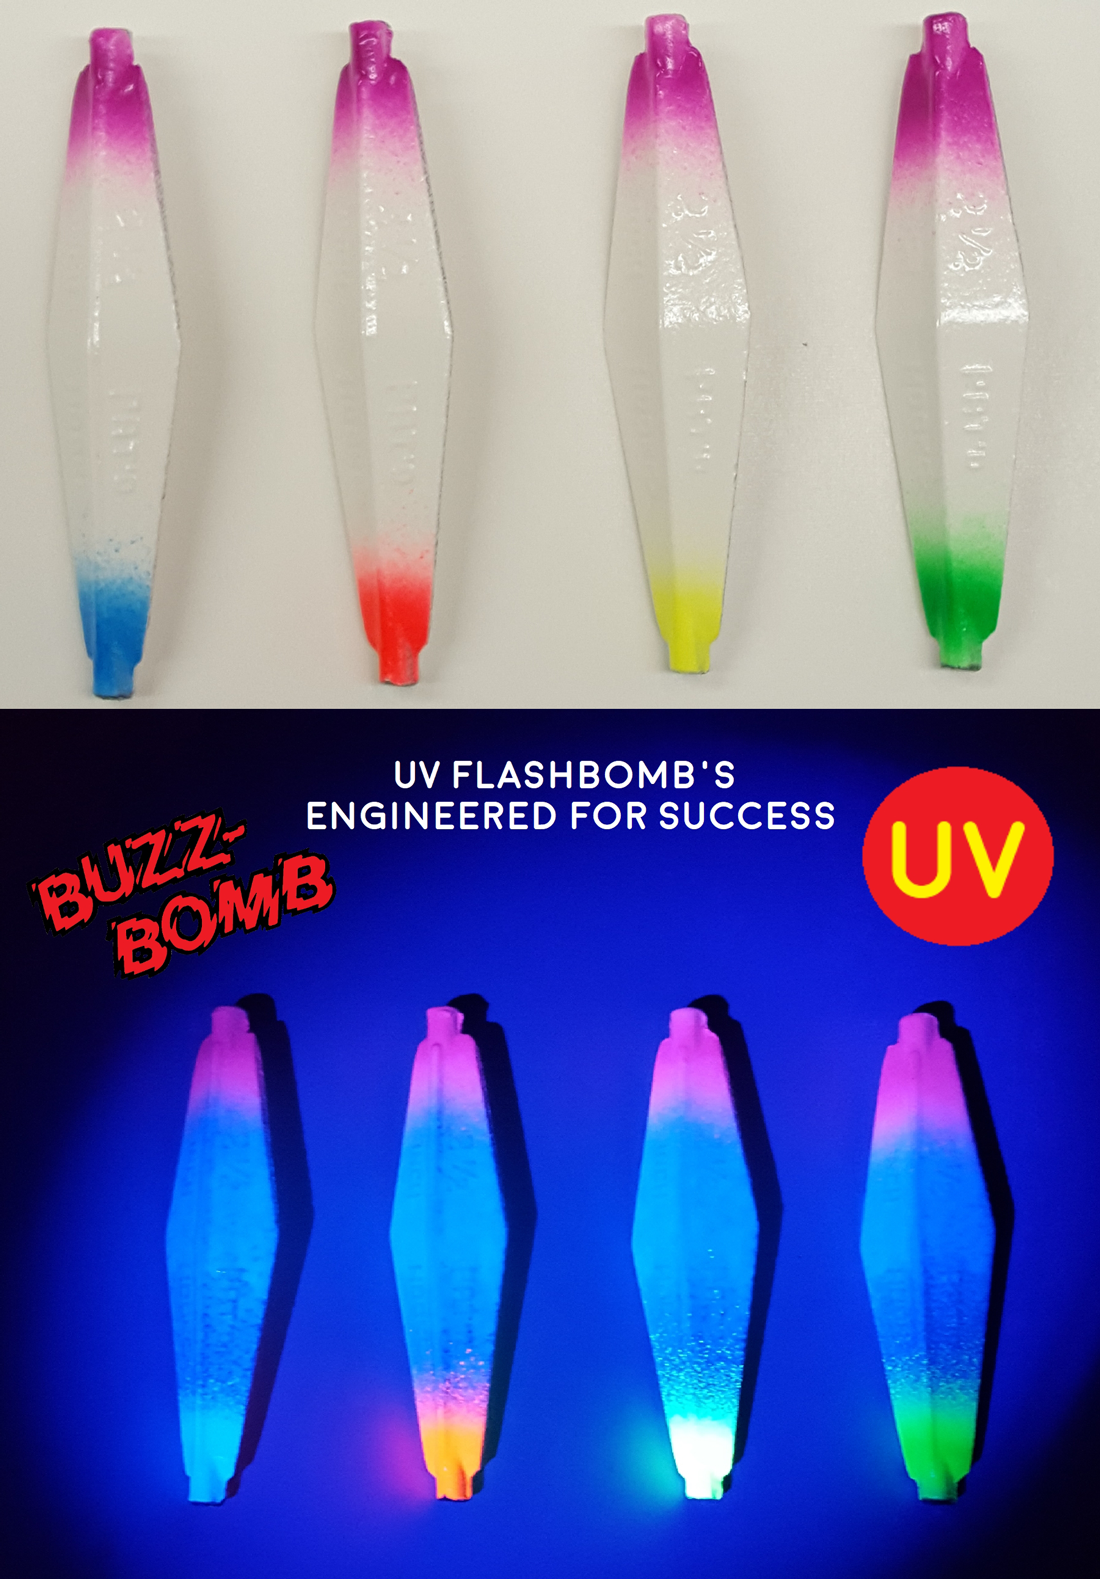 https://www.buzzbombtackle.com/wp-content/uploads/2018/06/Compare-UV-FlashBombs.with-logo.png